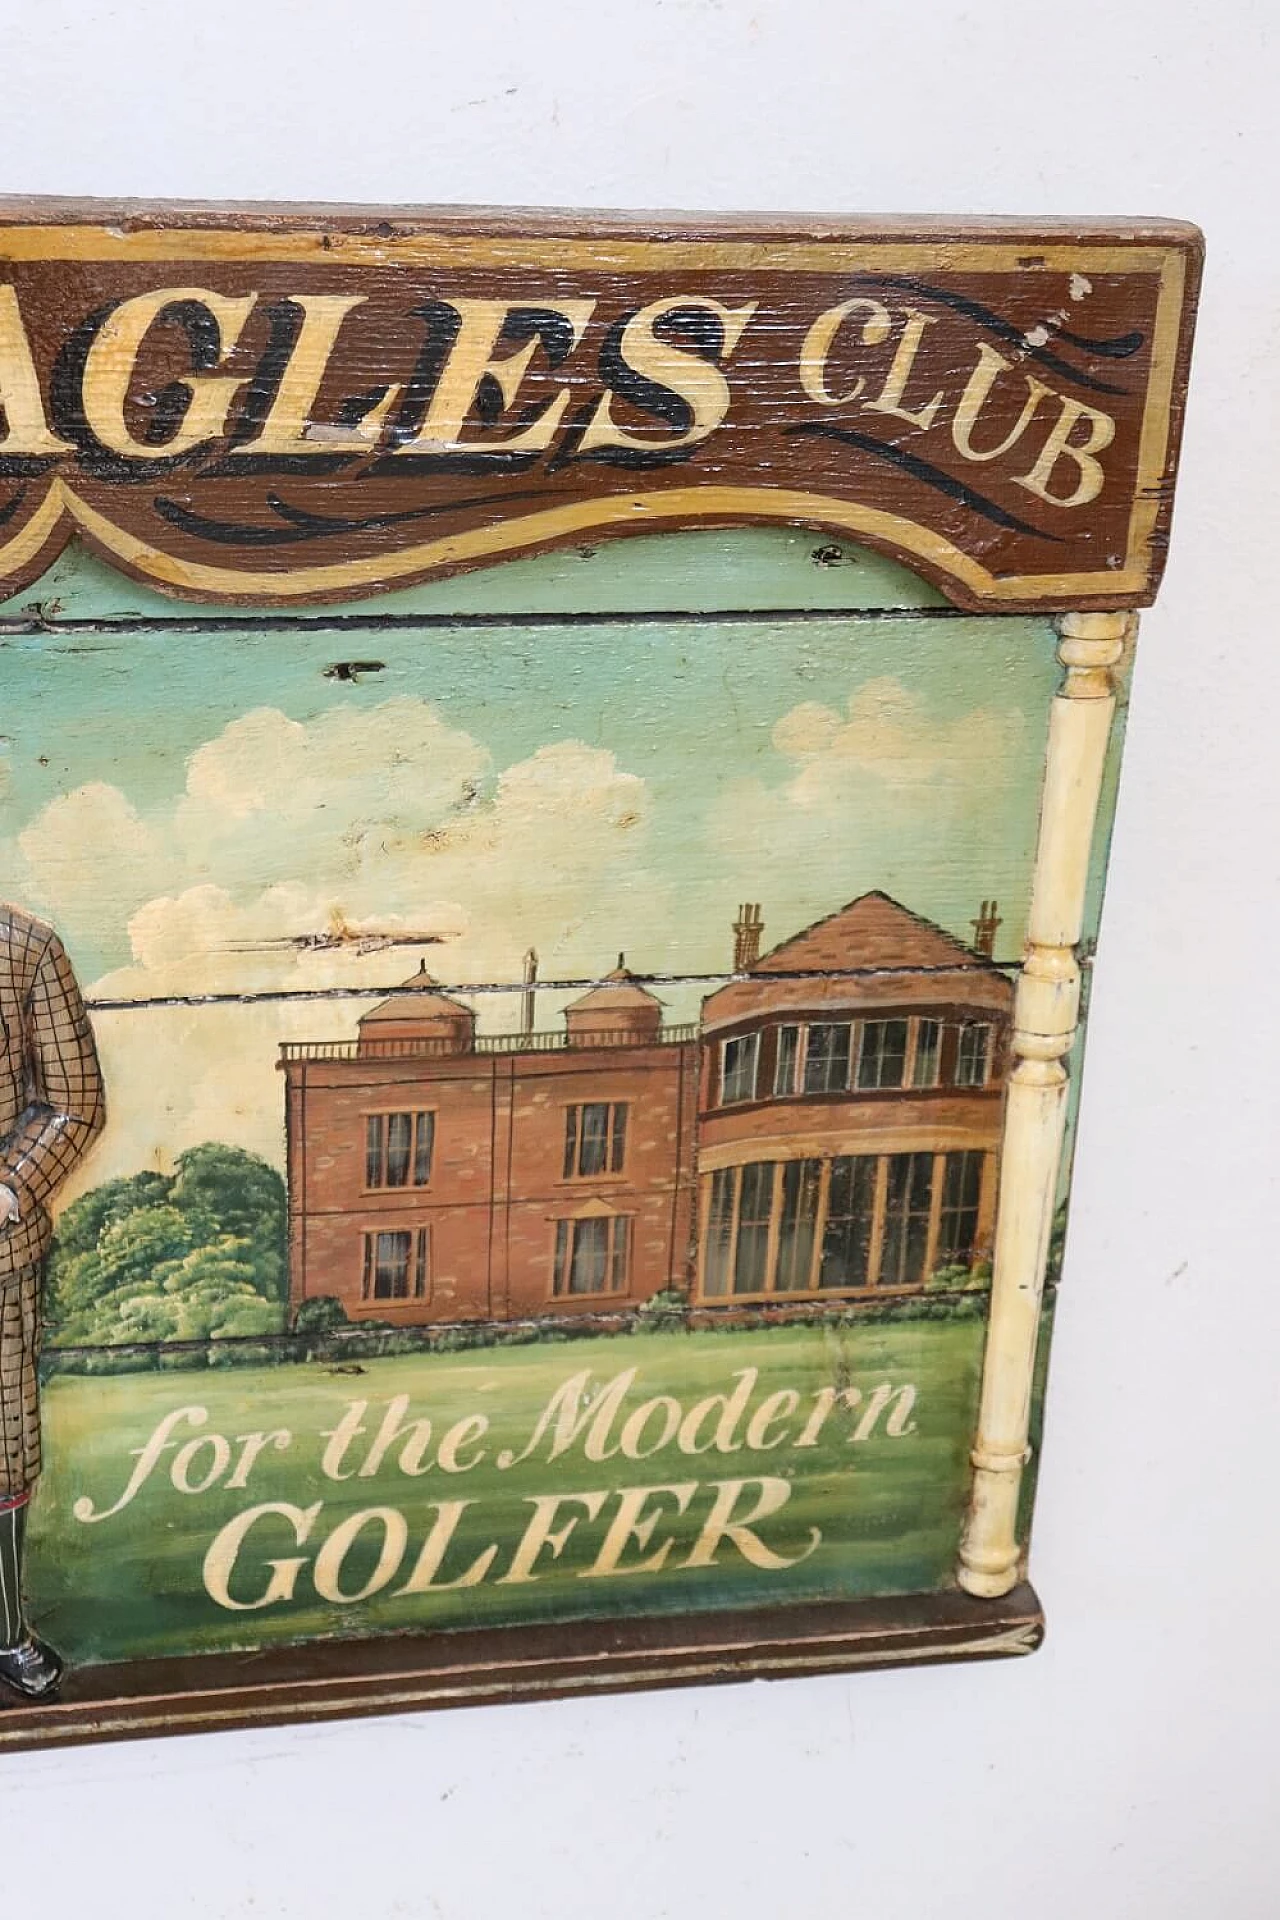 Hand-painted sign on wood for Gleneagles golf club, 1920s 5